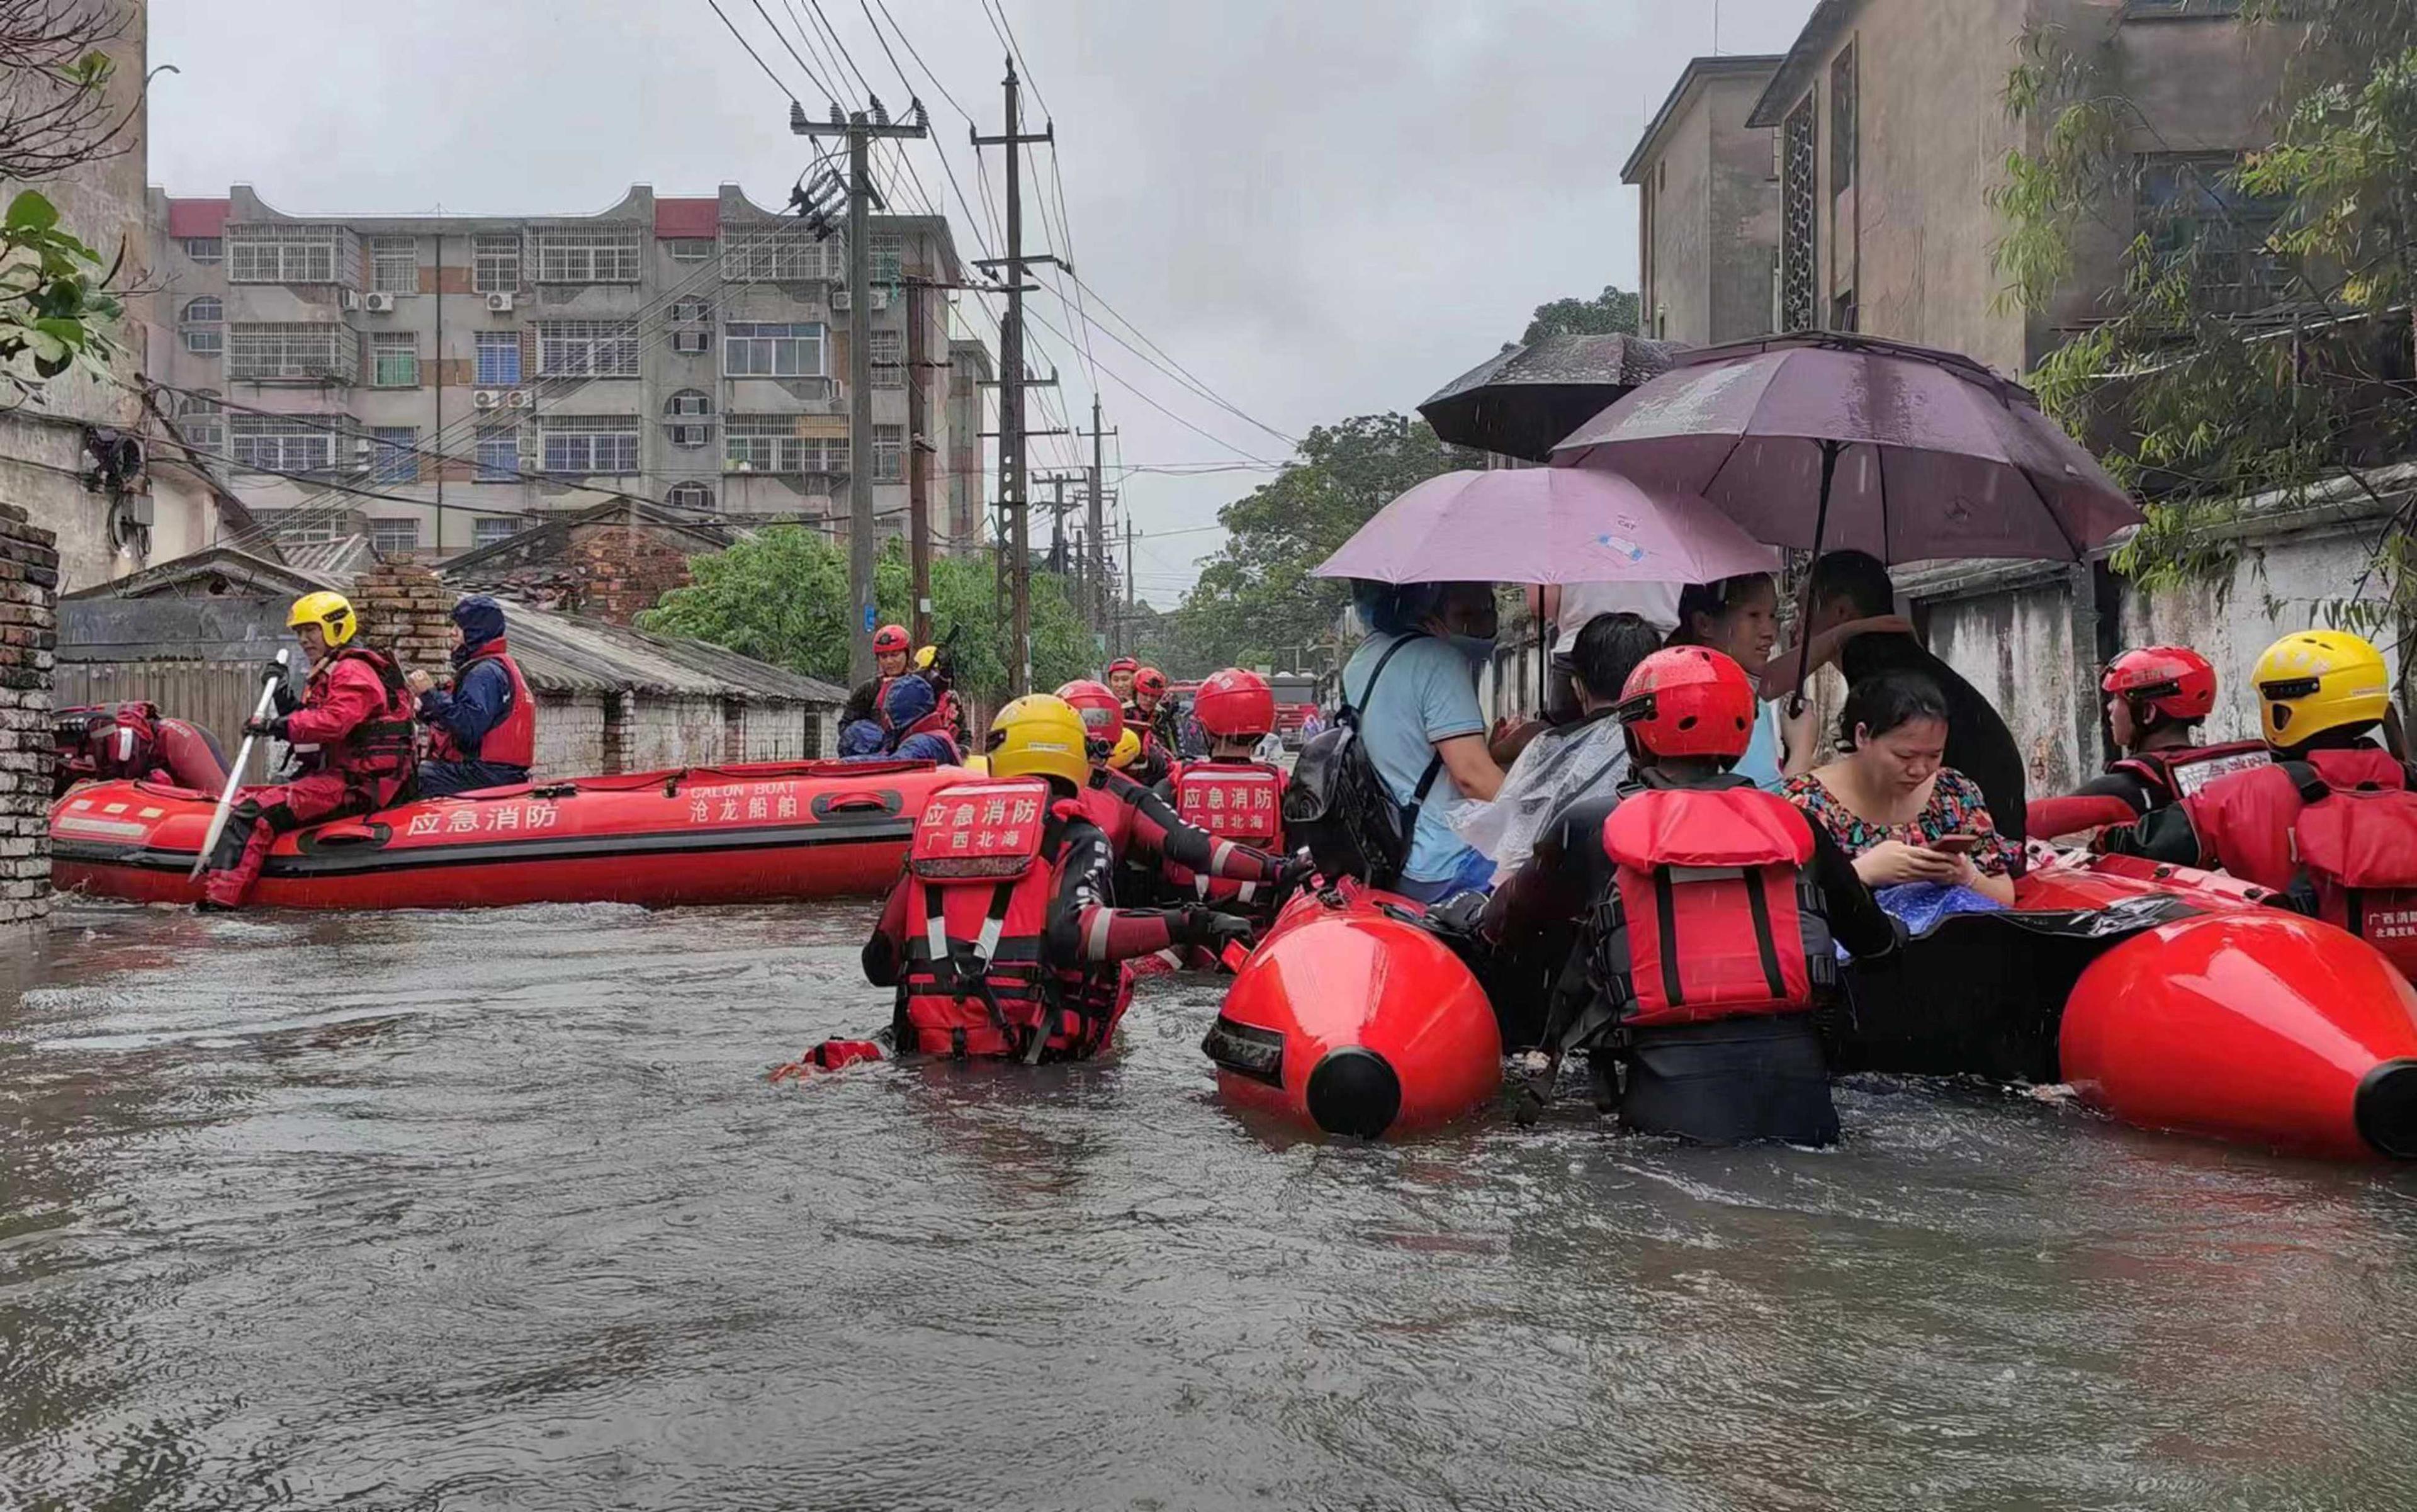 Rescue workers evacuate stranded residents on a flooded street following heavy rainfall in Beihai, Guangxi Zhuang Autonomous Region, China June 8. Photo: Reuters